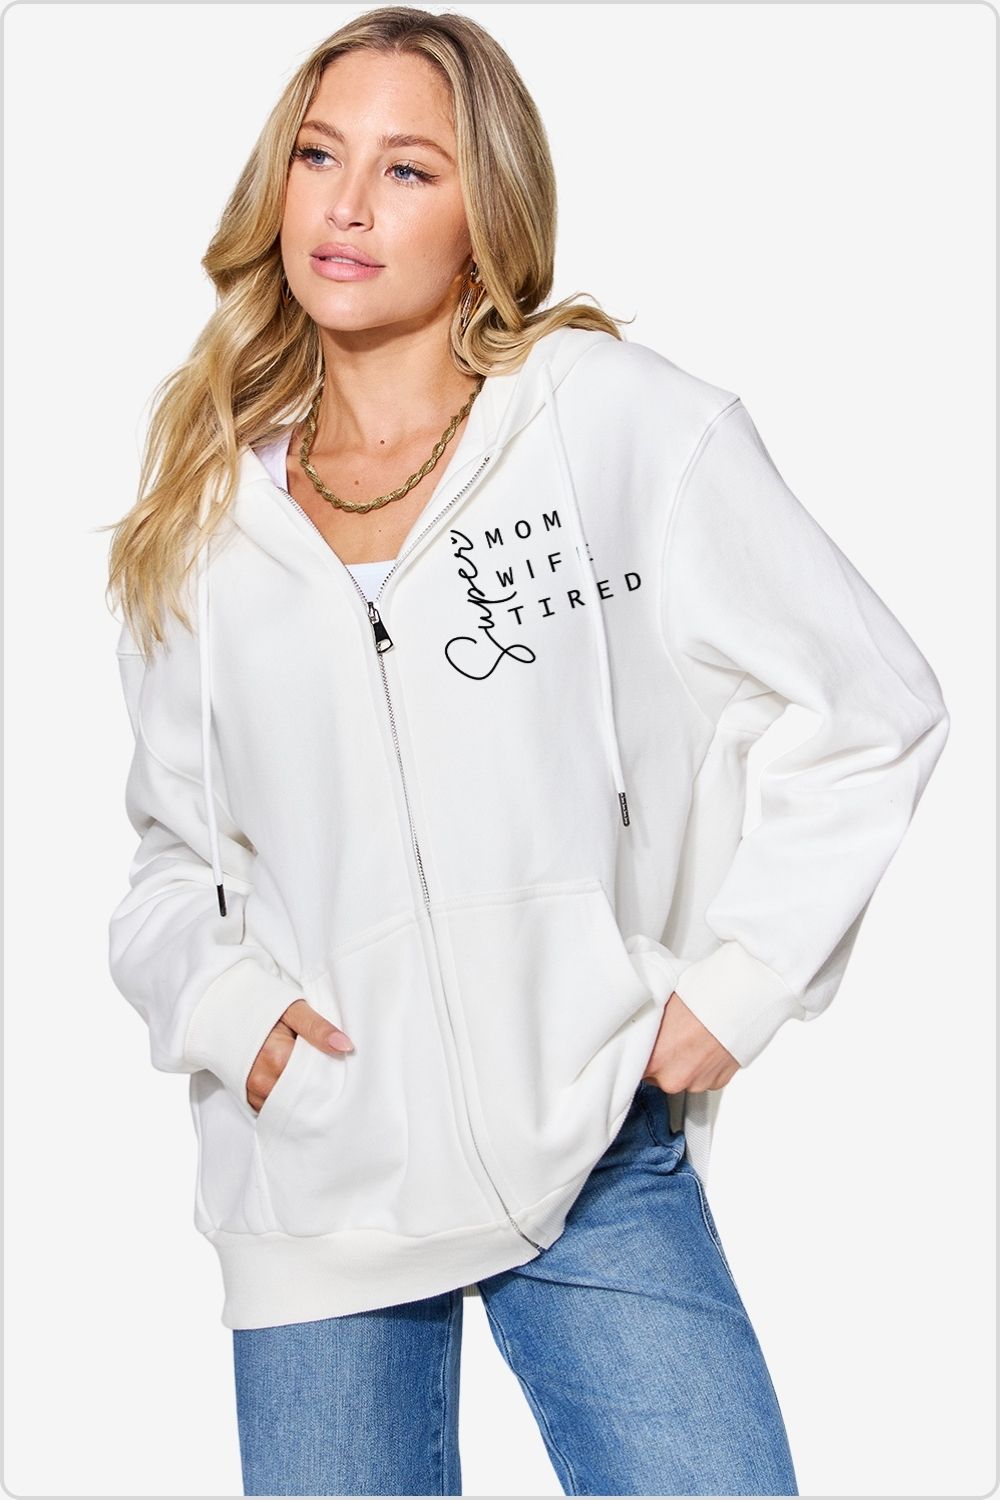 Chic letter graphic long sleeve hoodie, perfect for casual style, White.